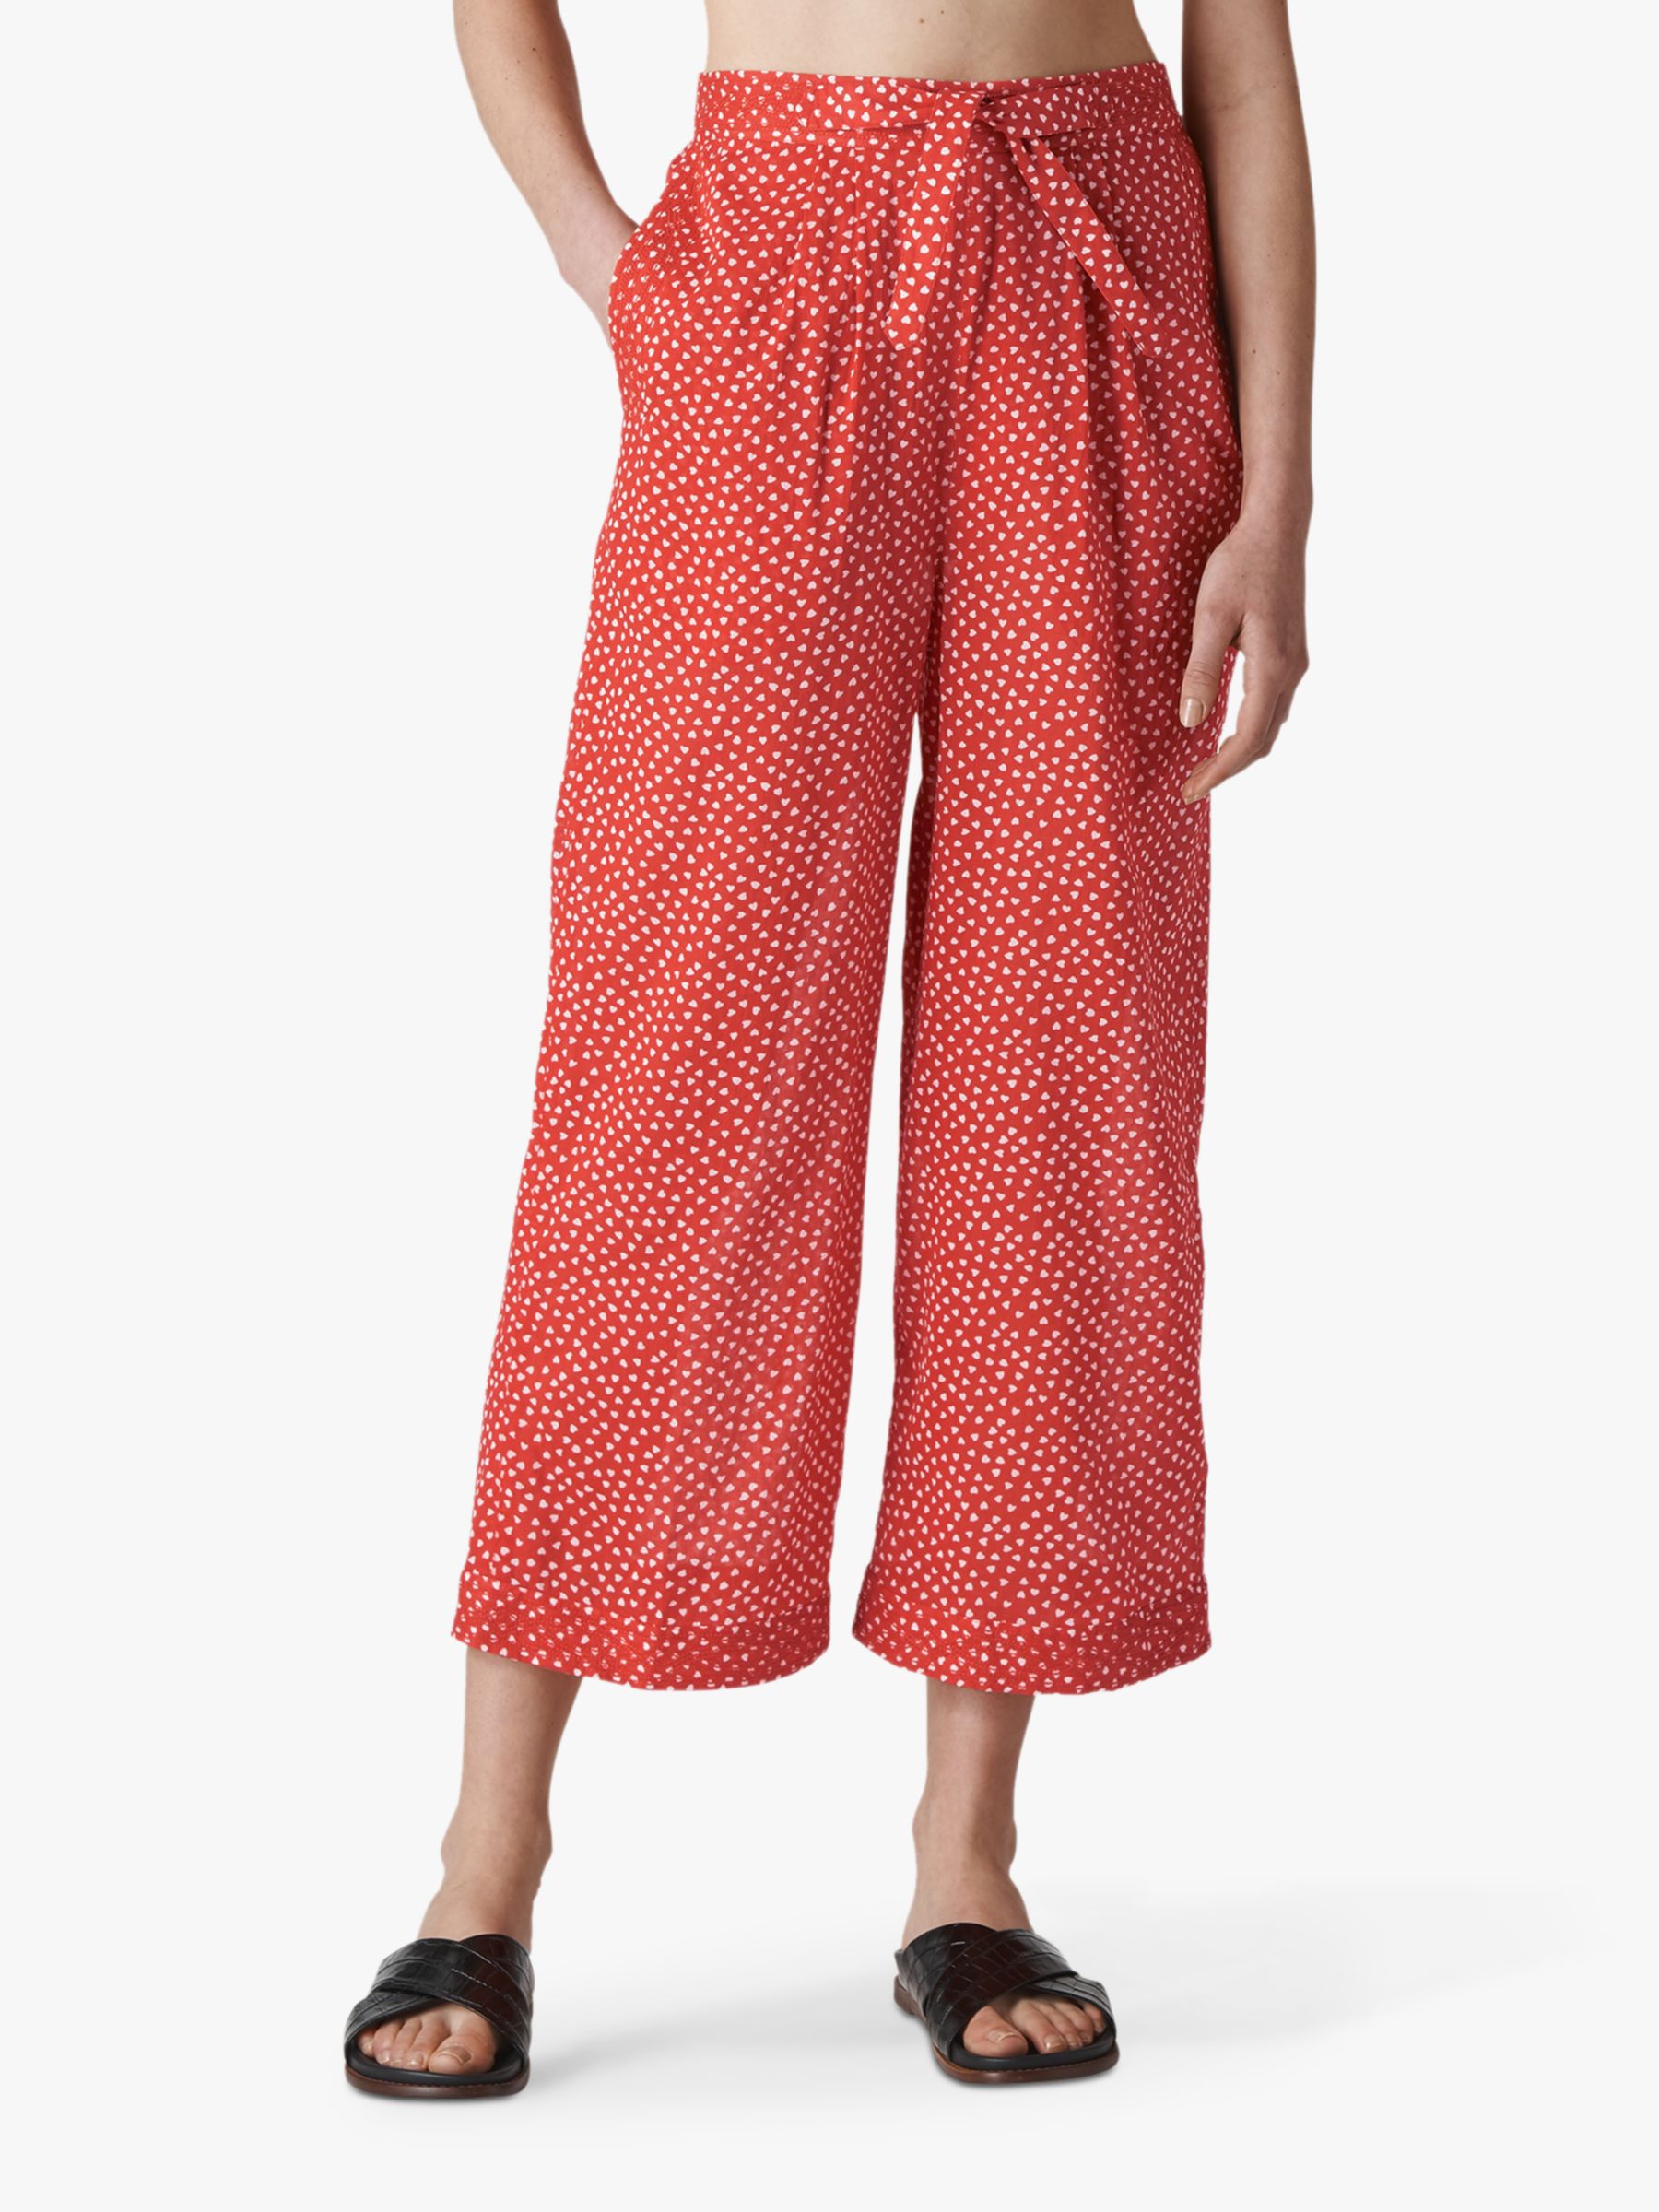 Whistles Beach Heart Cotton Trousers, Red/Multi